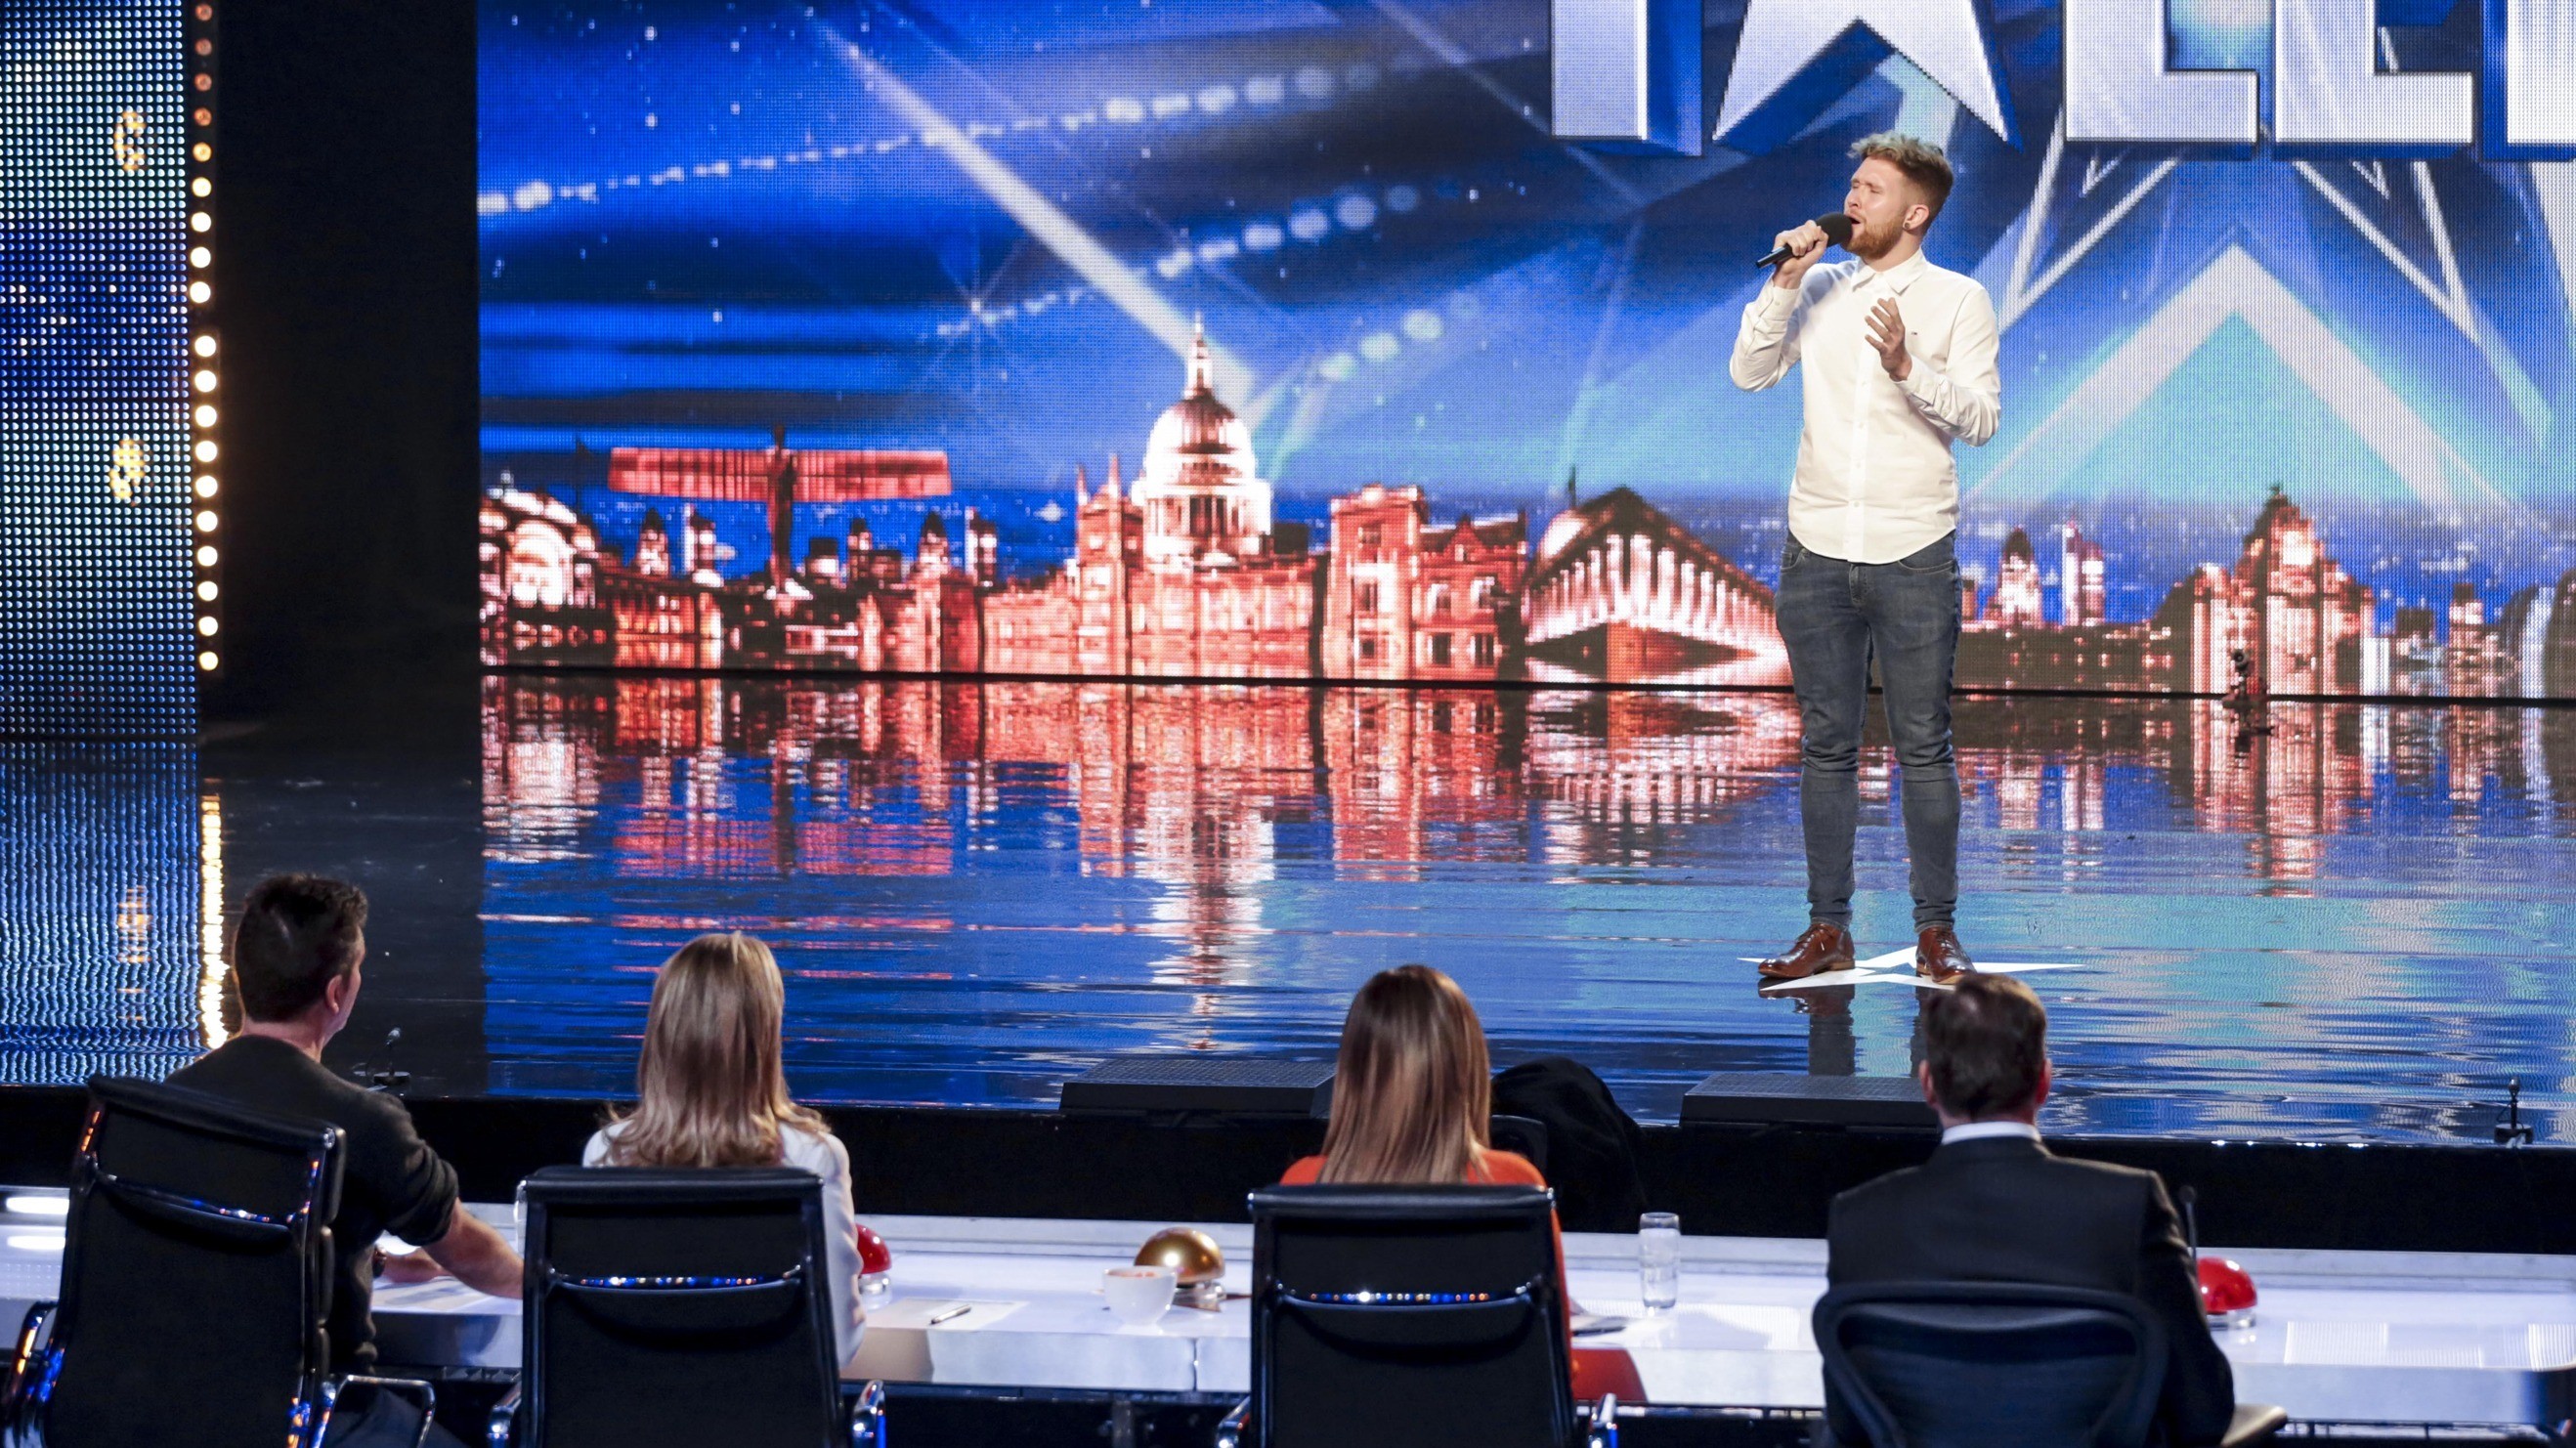 The Acts Who Wowed The Judges In Week 3 Britains Got Talent 